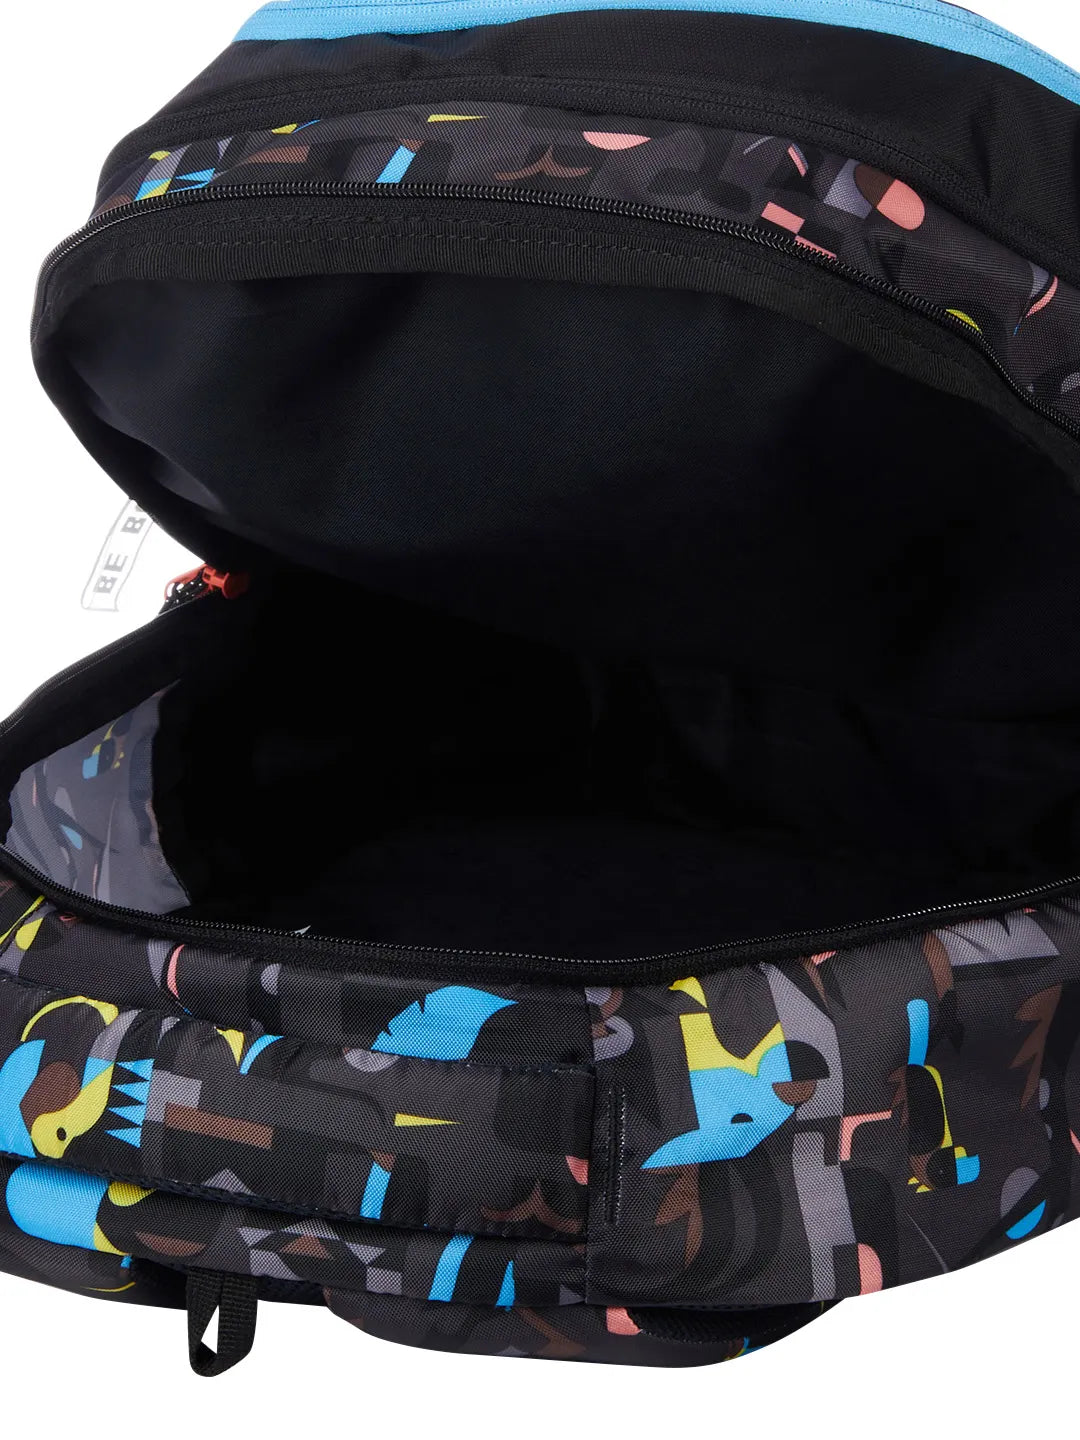 WIKI 6 Fauna Black Backpack with Sleeve Separator